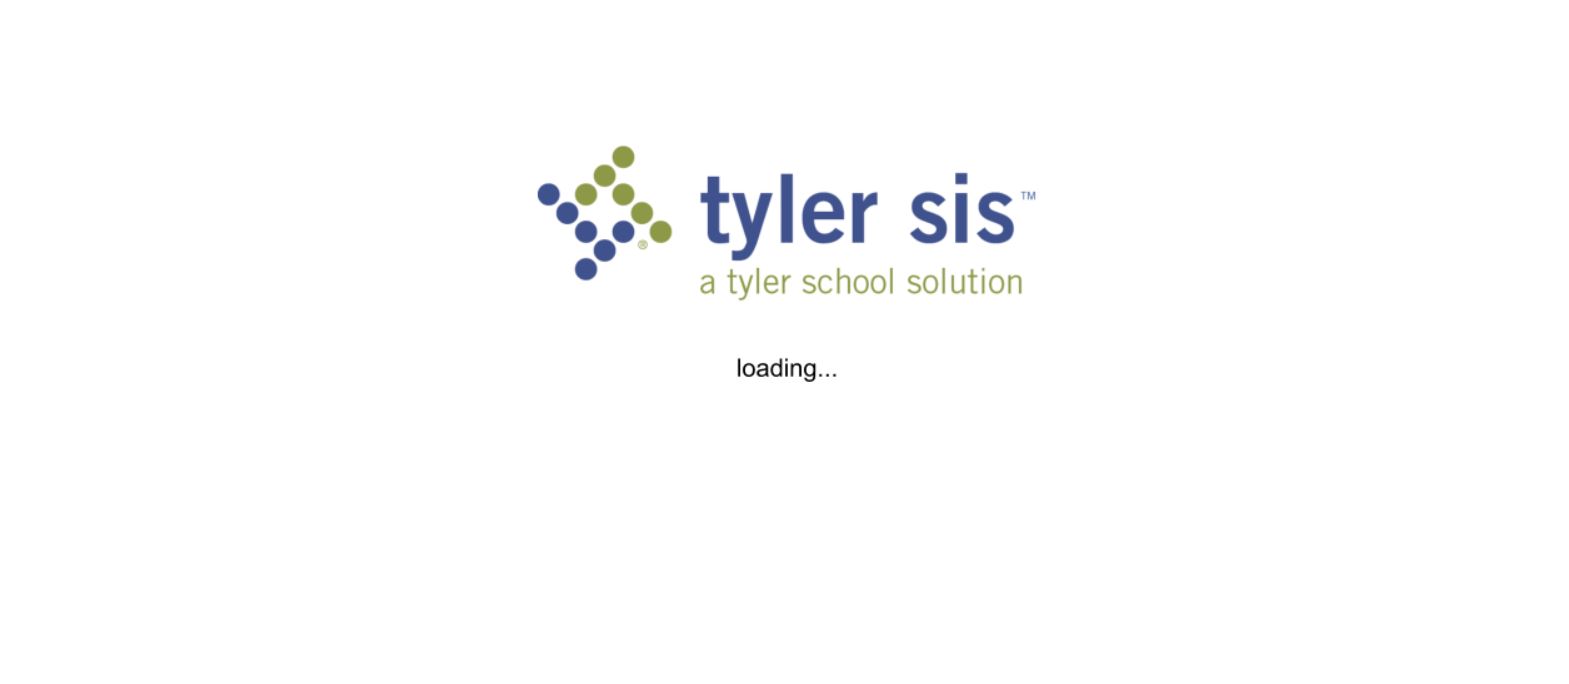 Uisdtyler Is A Web - Based Application That Enables Parents To Access And Update The Registration Information Of Their Children